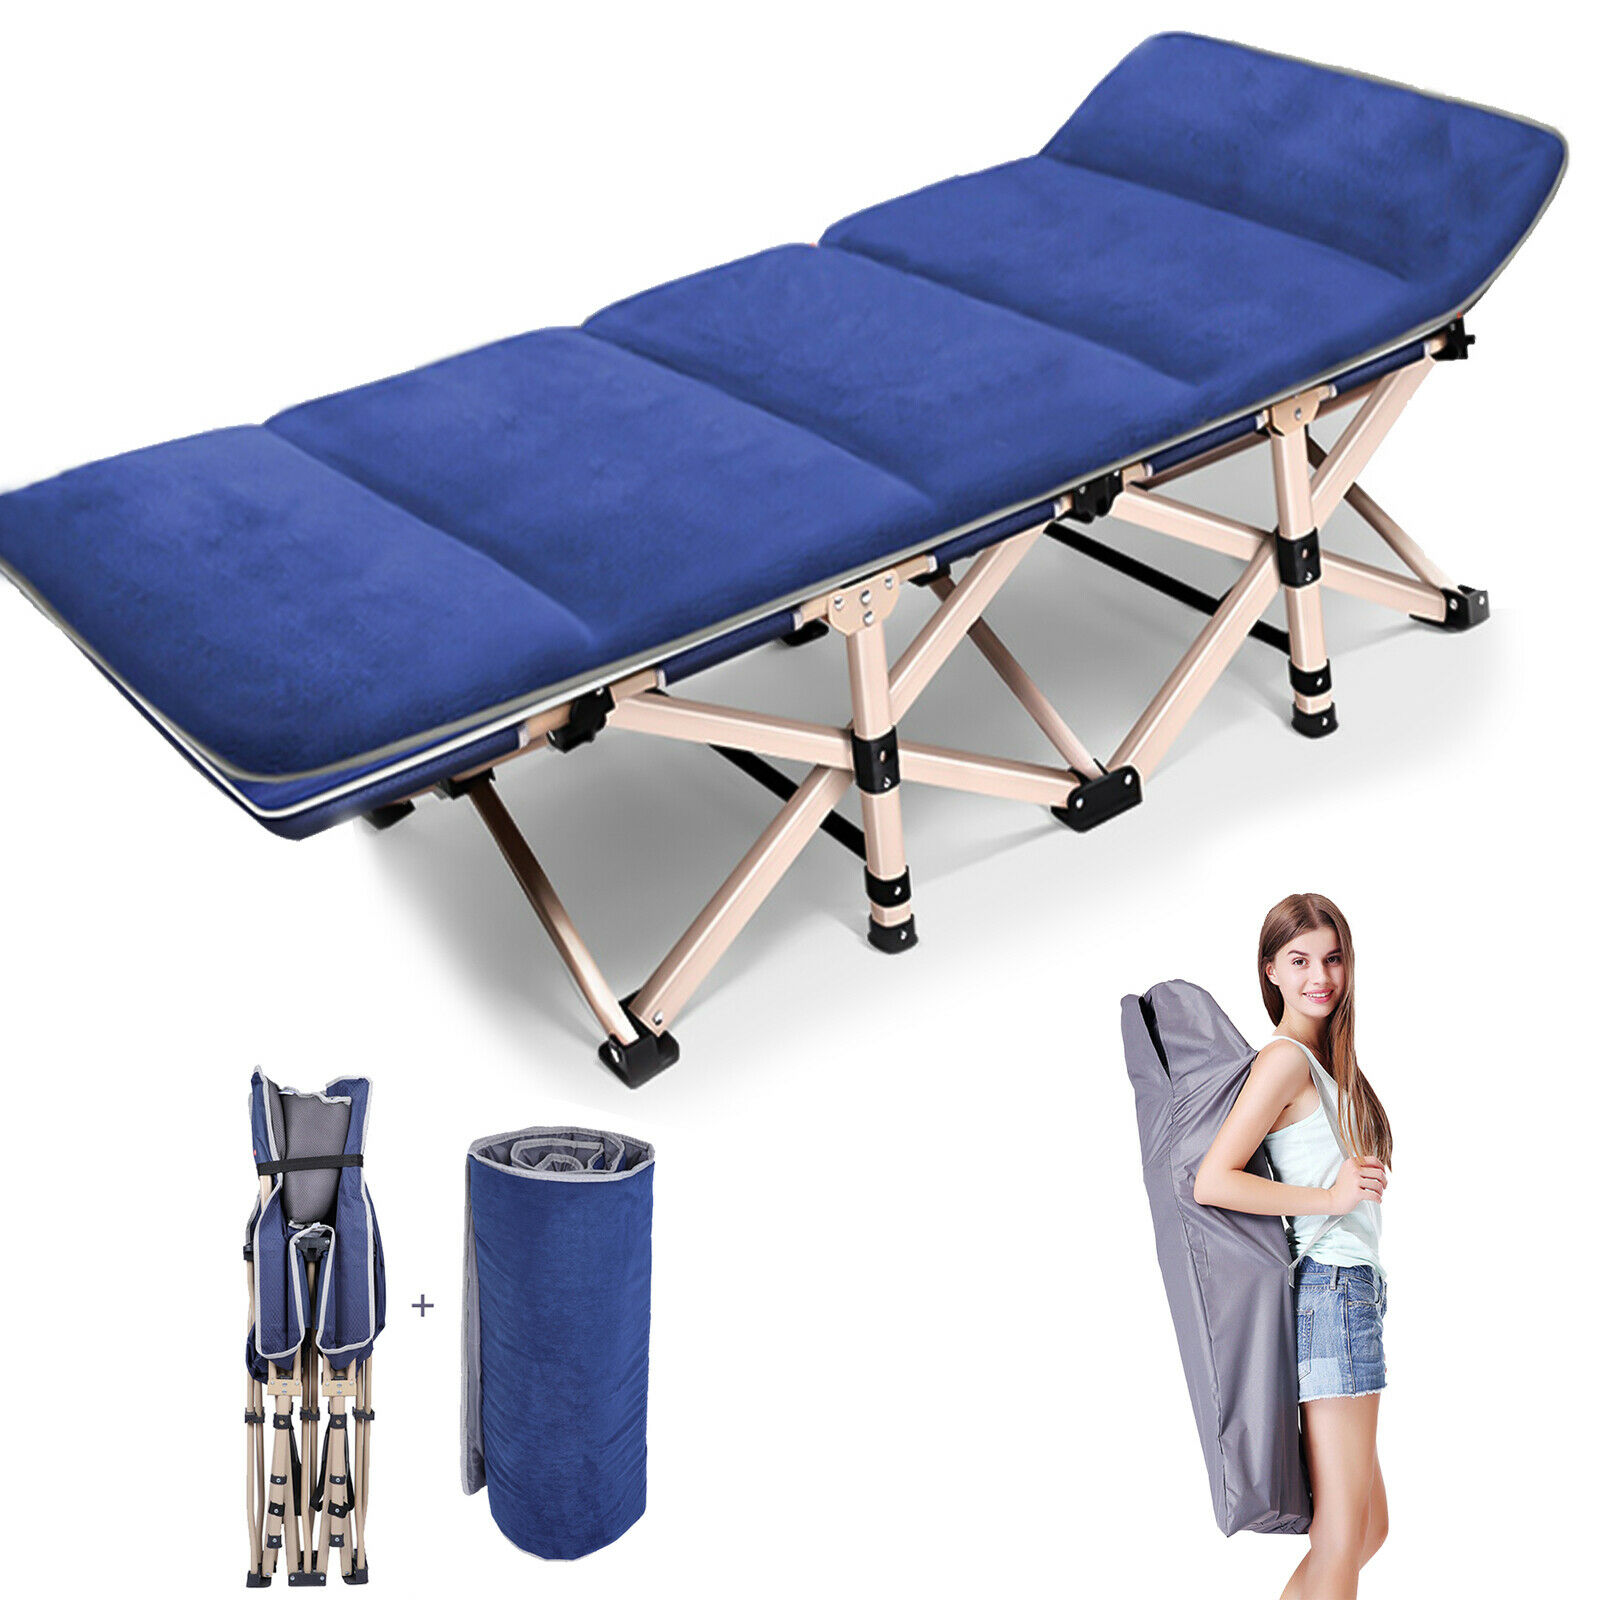 Outdoor Portable Folding Bed Cot Military Hiking Camping Sleeping Bed & Mattress